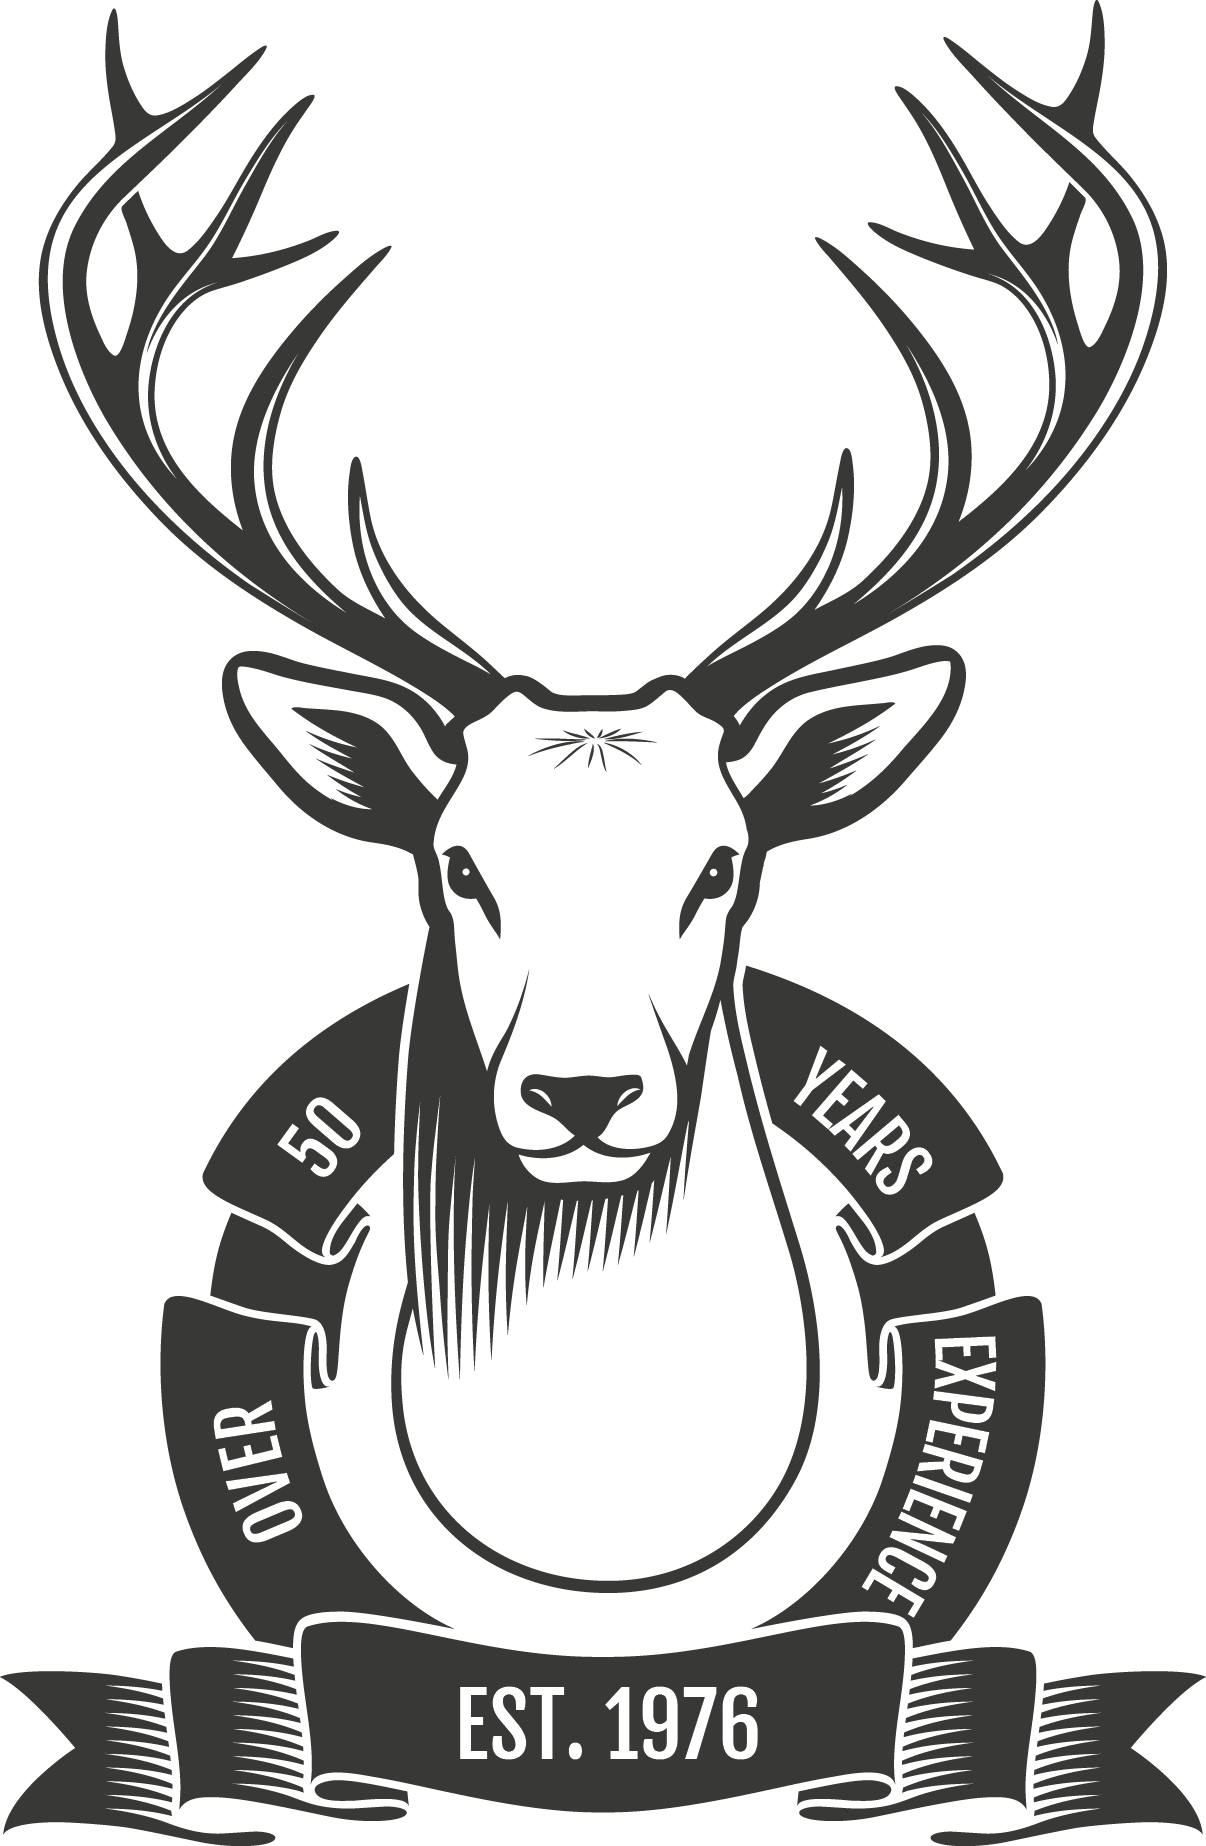 White tail deer mount graphic with a ribbon stating 'Over 50 Years Experience'